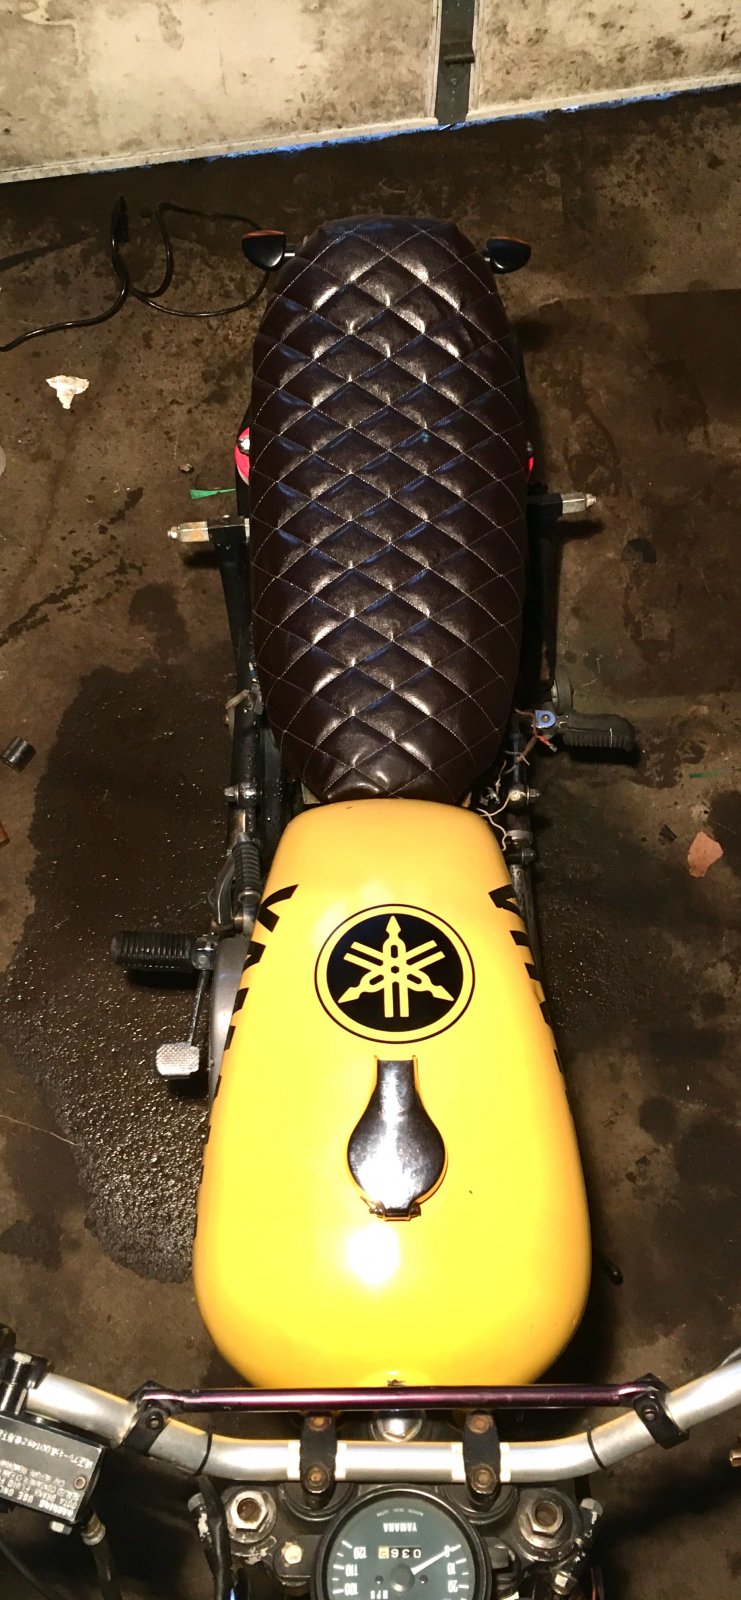 New seat pan wrapped